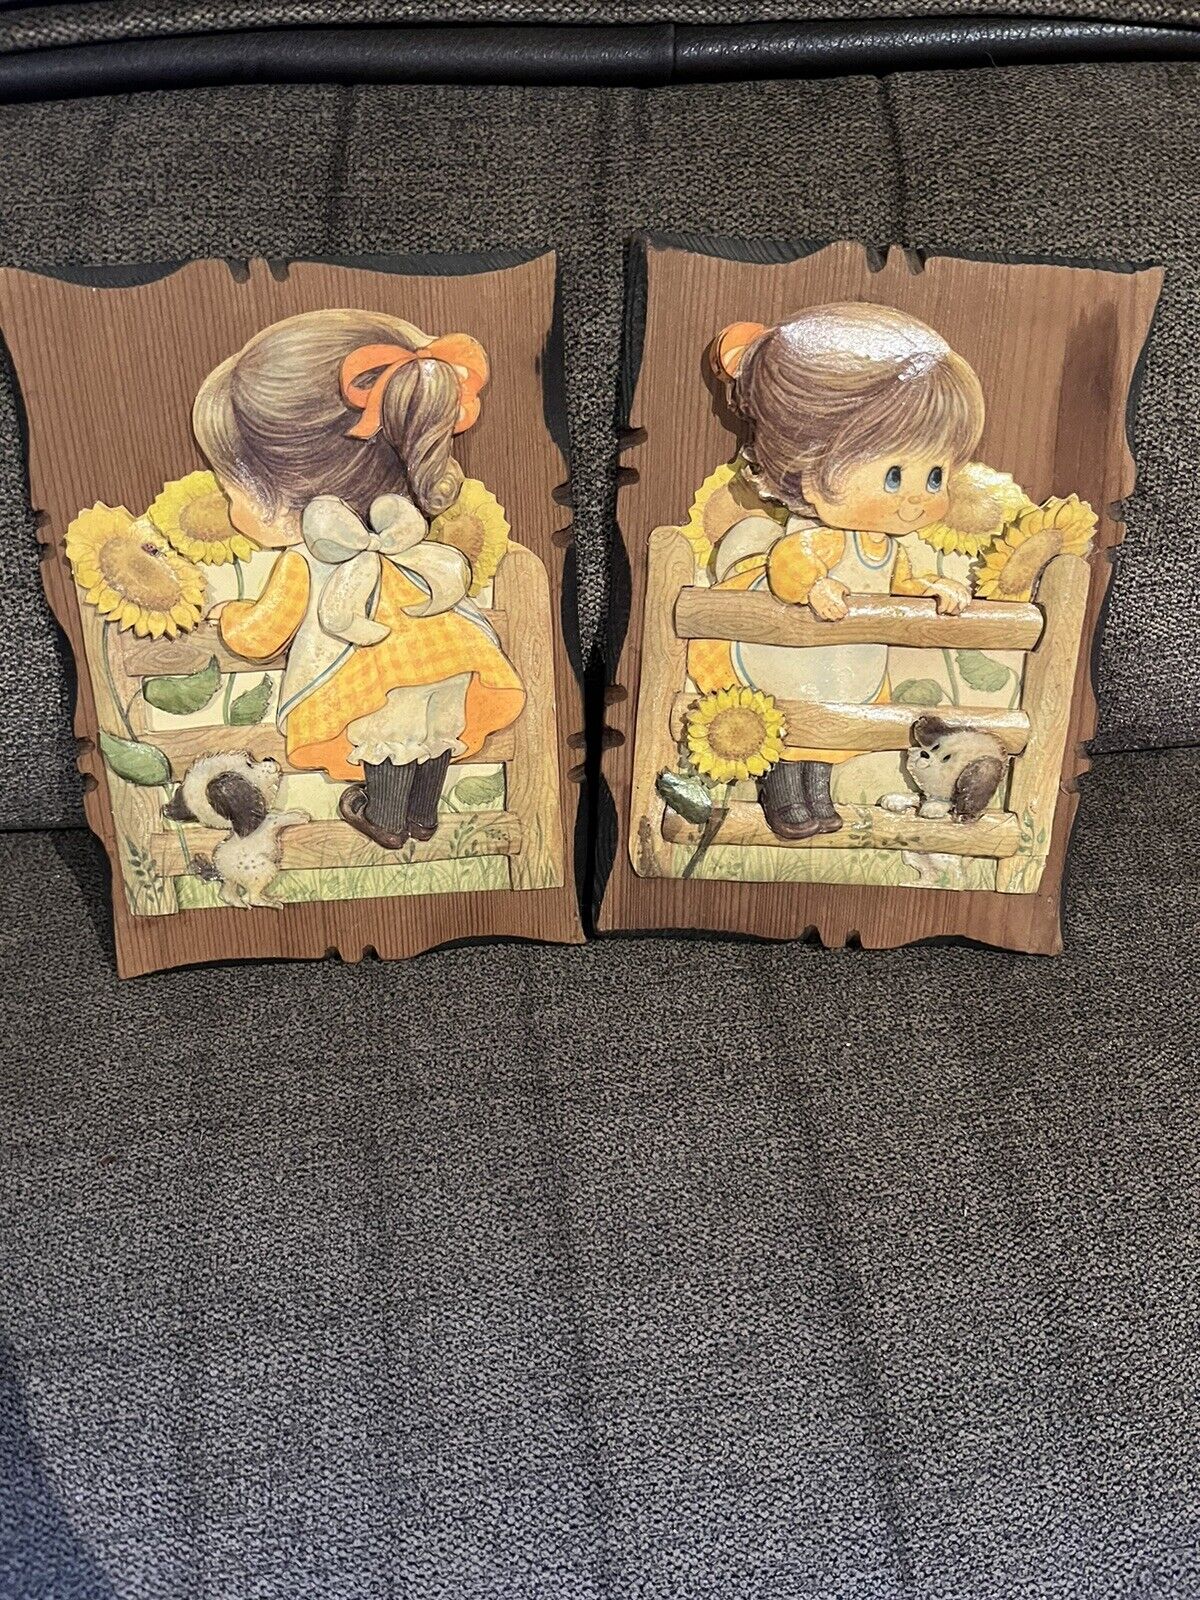 2 Precious Moments style sunflower dog Wood Art Vtg Wall Hanging 3 dimensional